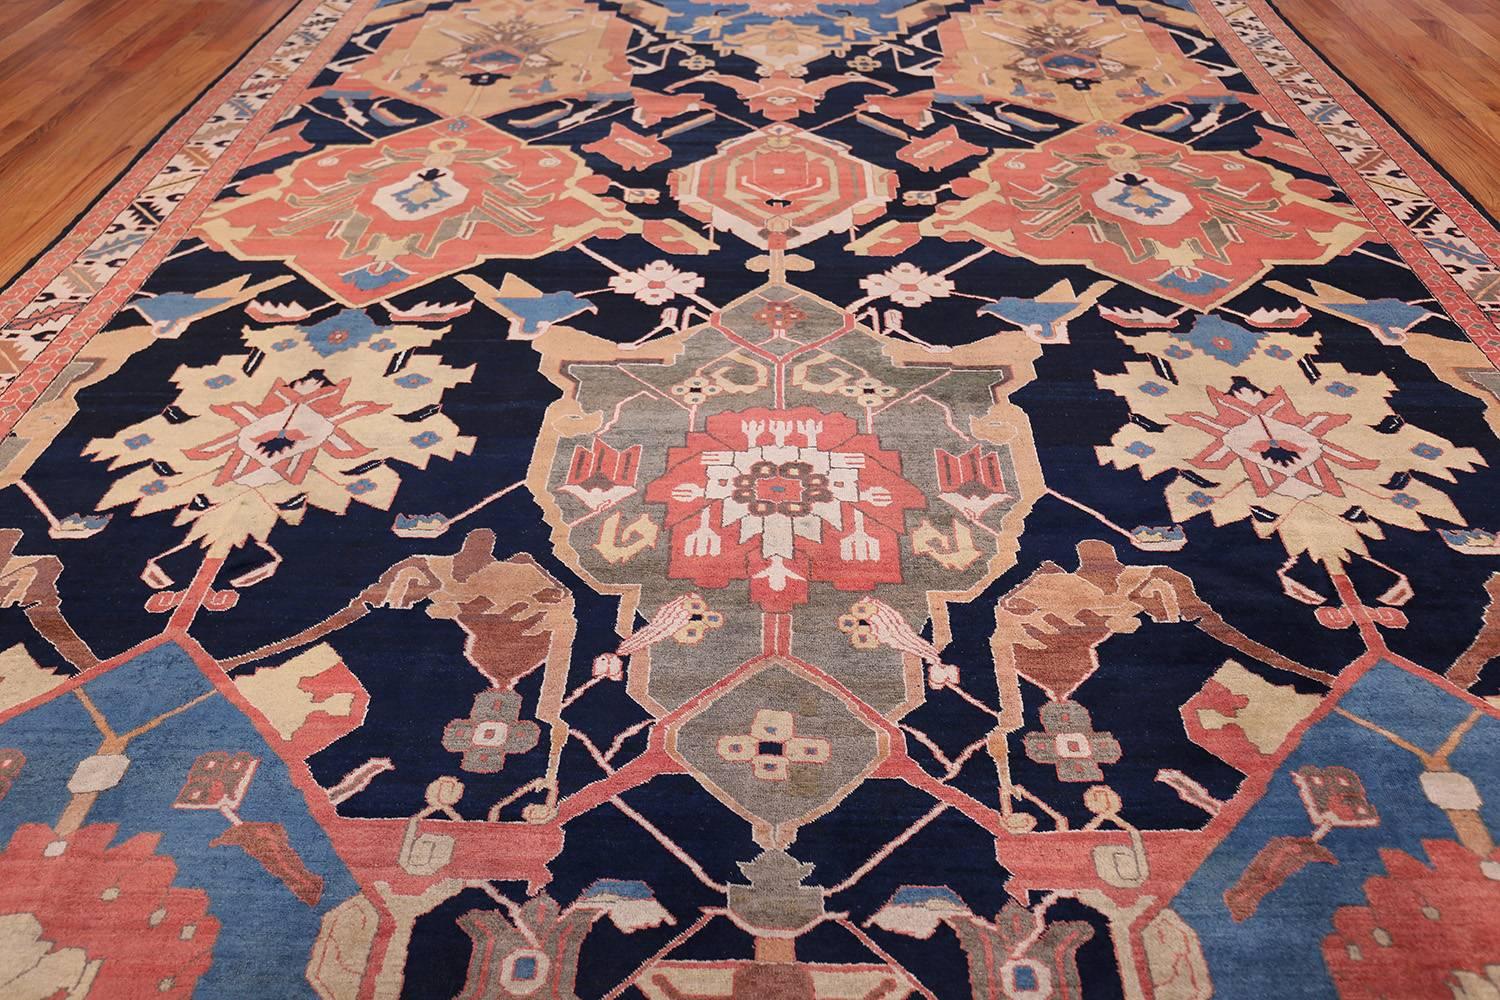 Antique Petag Persian Tabriz Rug. Size: 9 ft 9 in x 14 ft 2 in (2.97 m x 4.32 m) 5